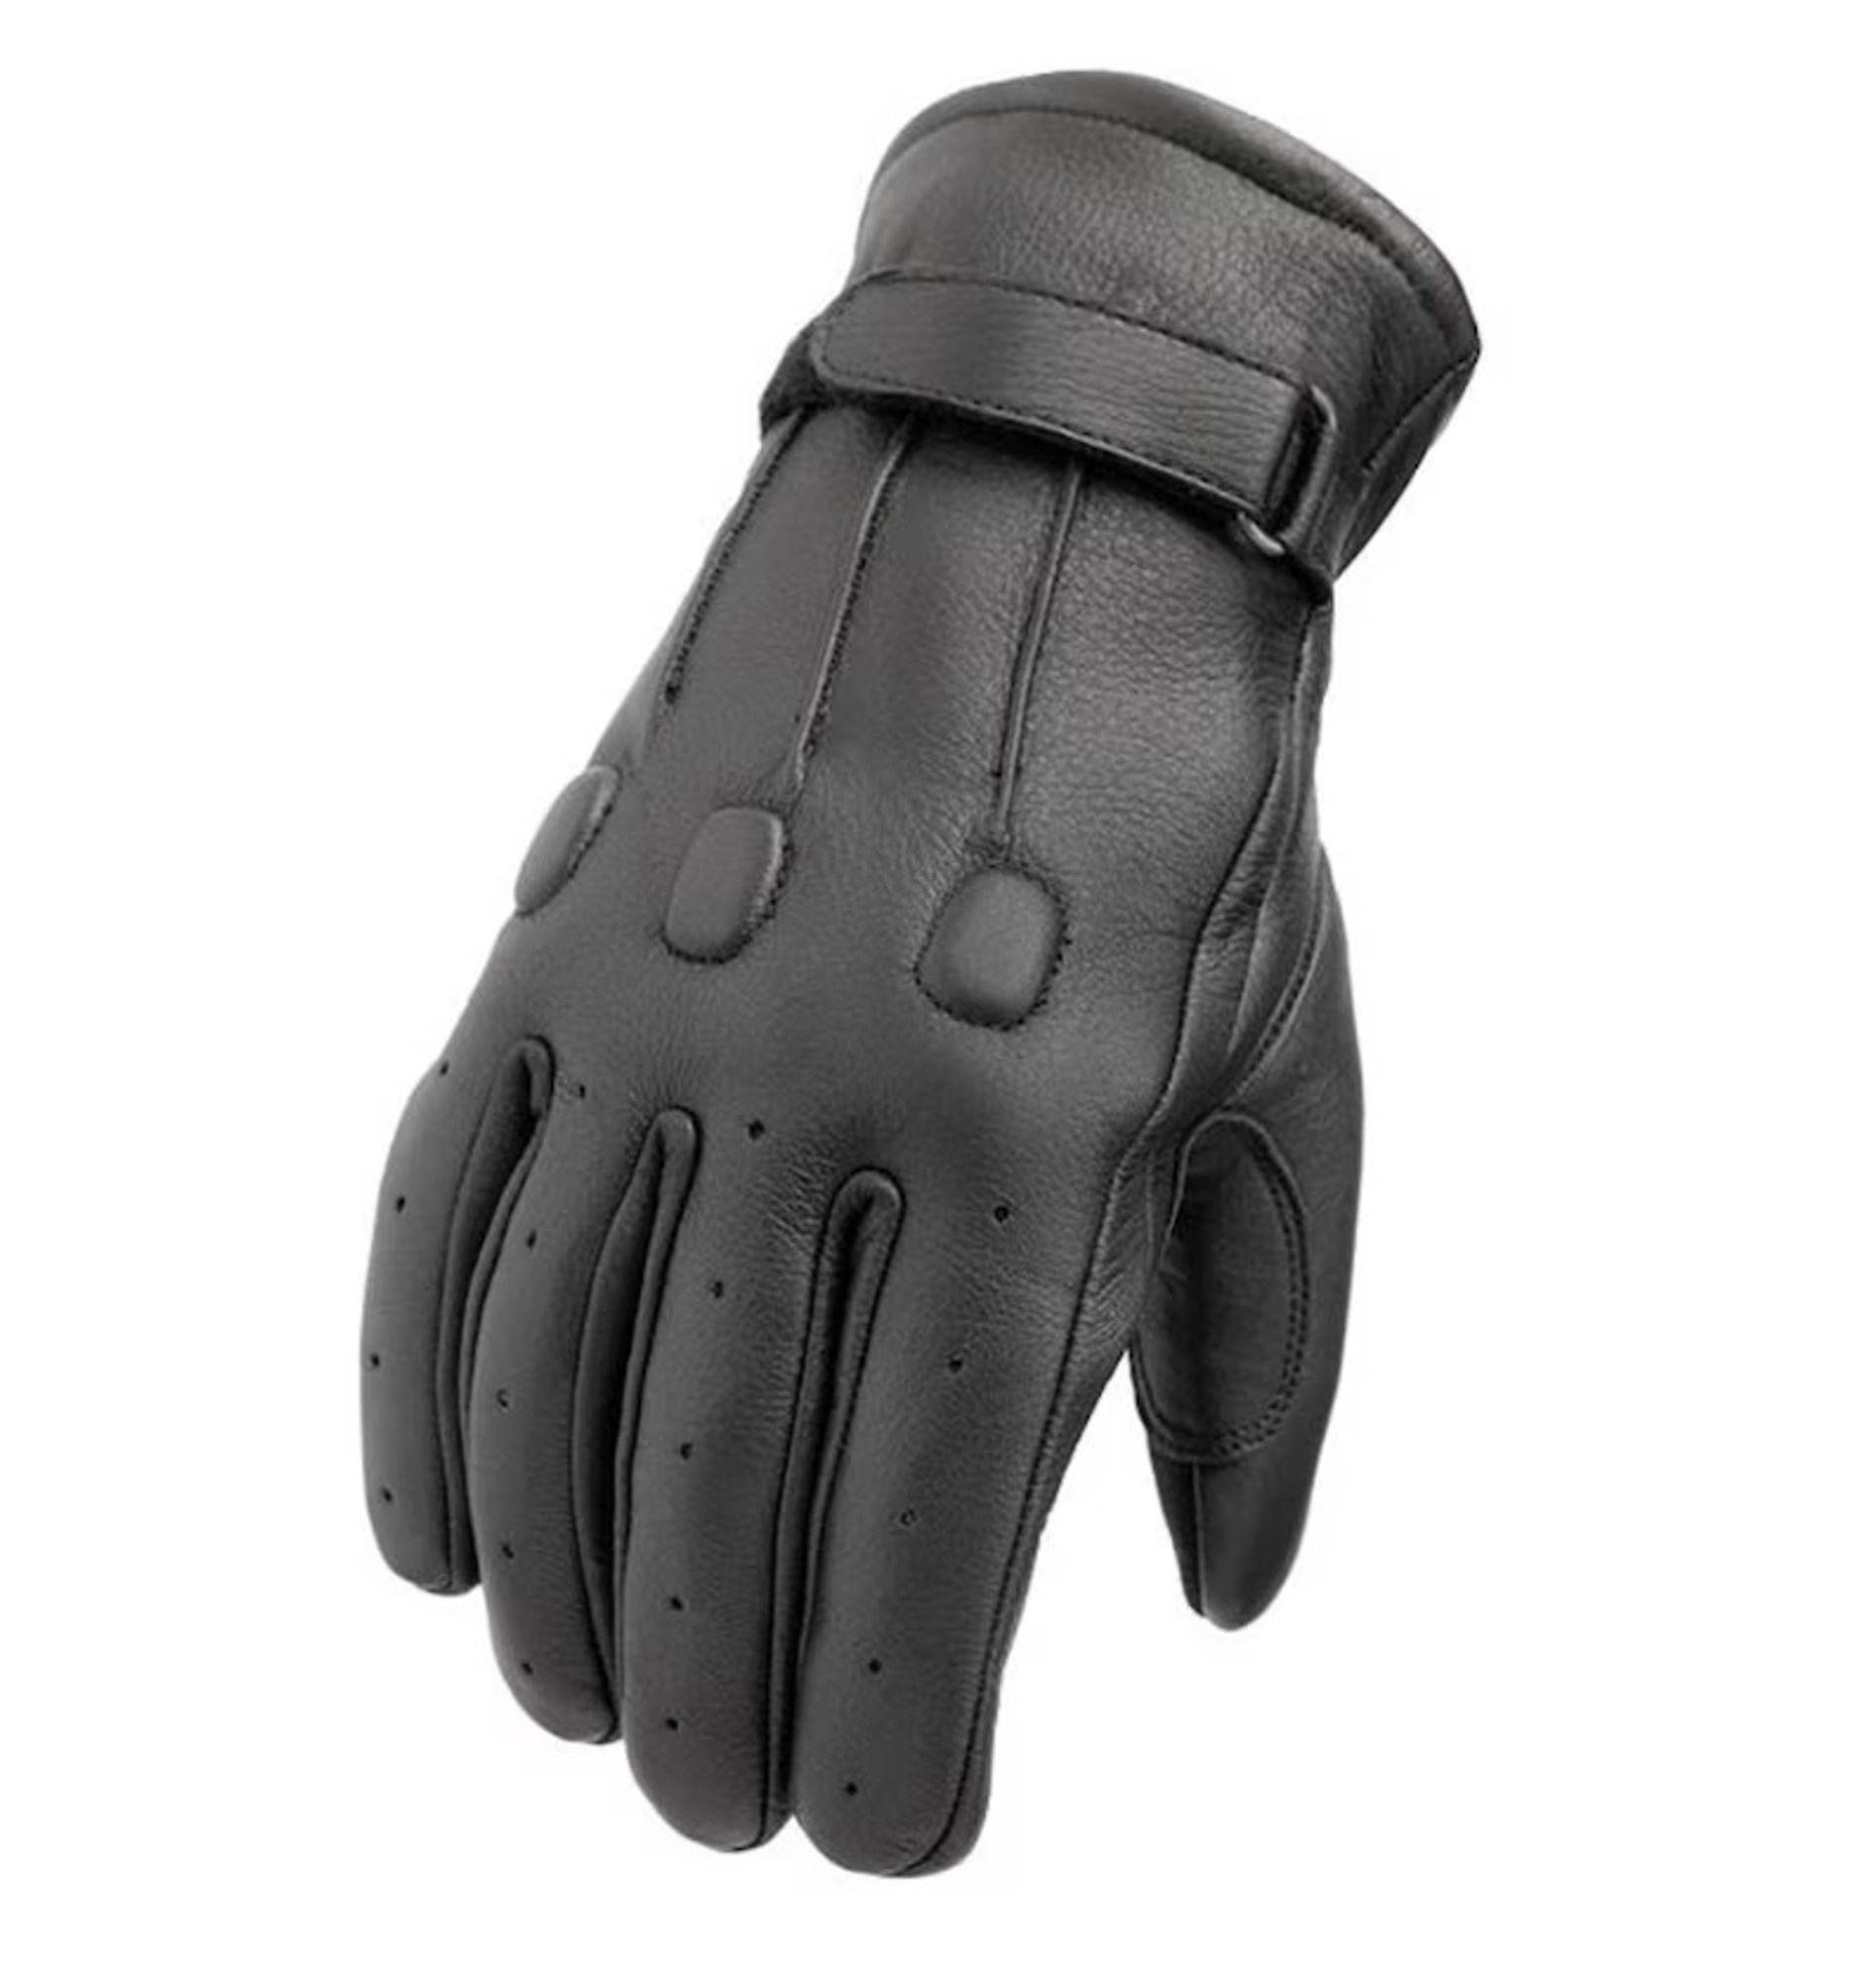 Shop lightweight glove with padded knuckles Online - SUNSET LEATHER